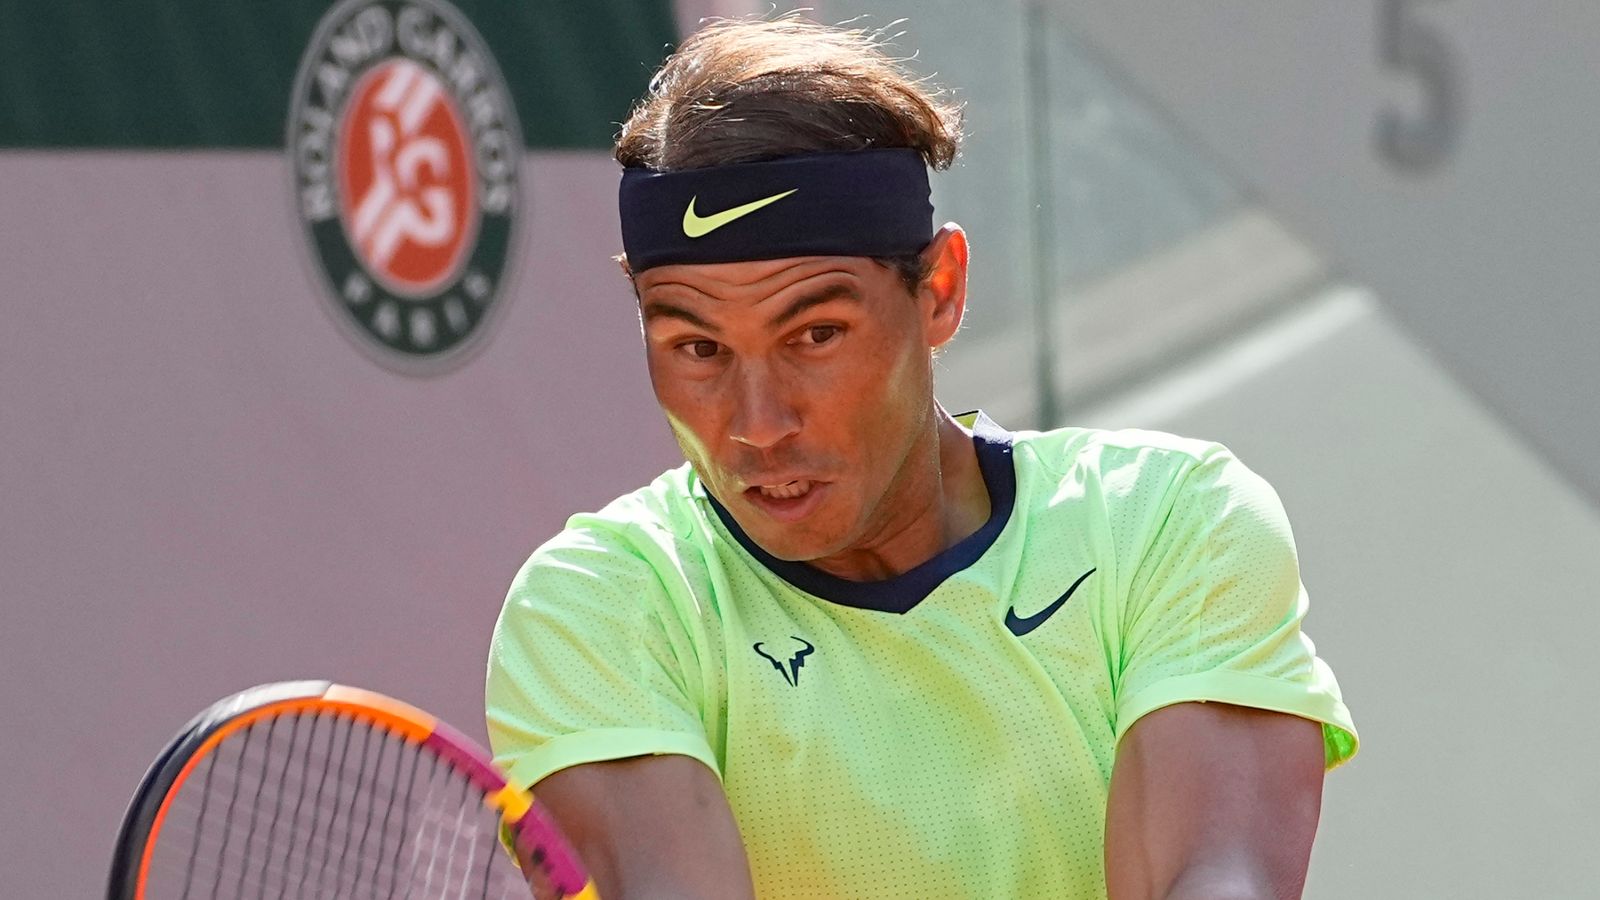 Rafael Nadal withdraws from Wimbledon and Tokyo 2020 in order to help prolong career Tennis News Sky Sports